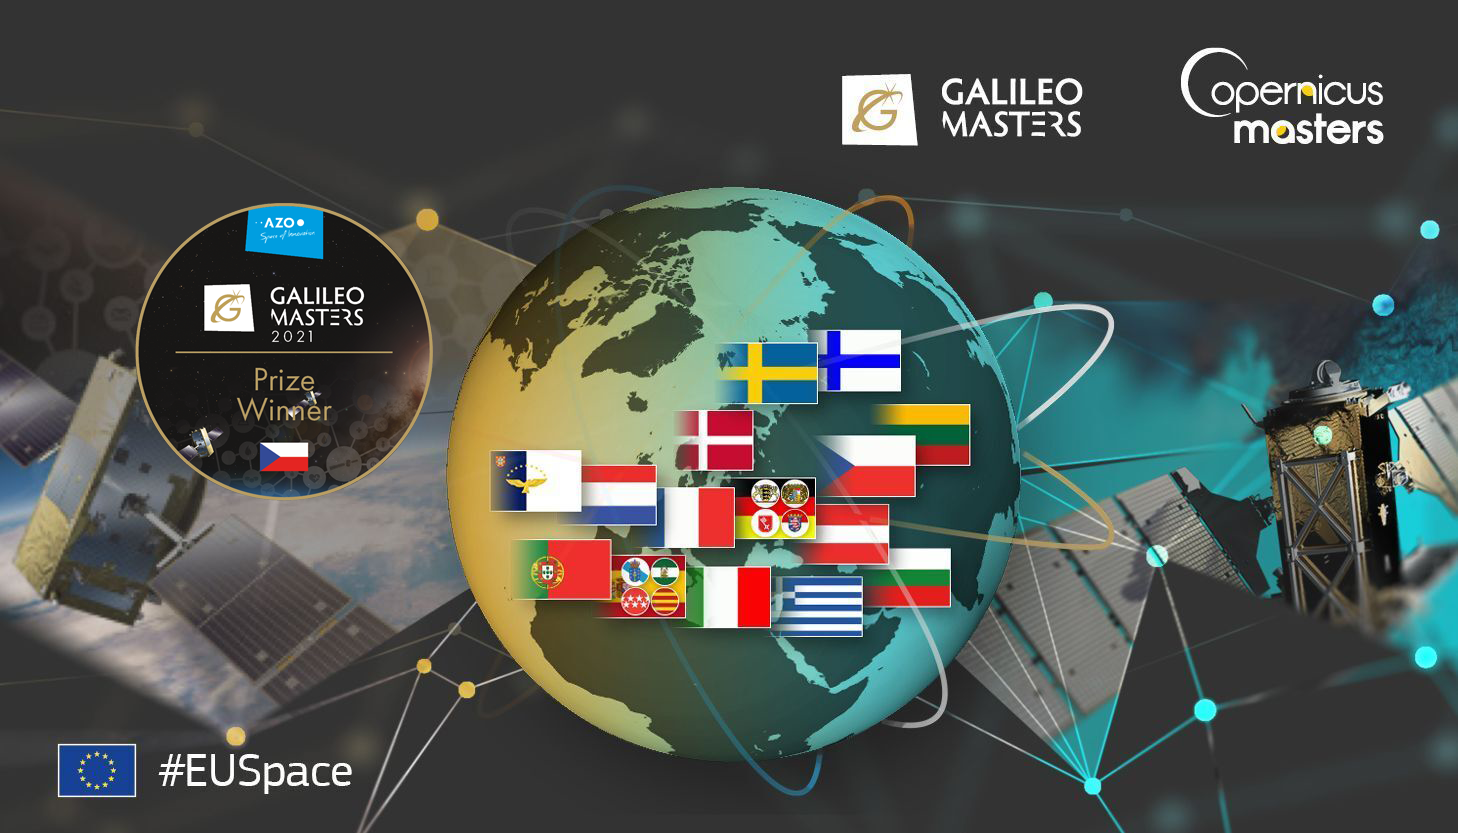 GINA SOFTWARE became the winner of Czech Galileo Masters prize